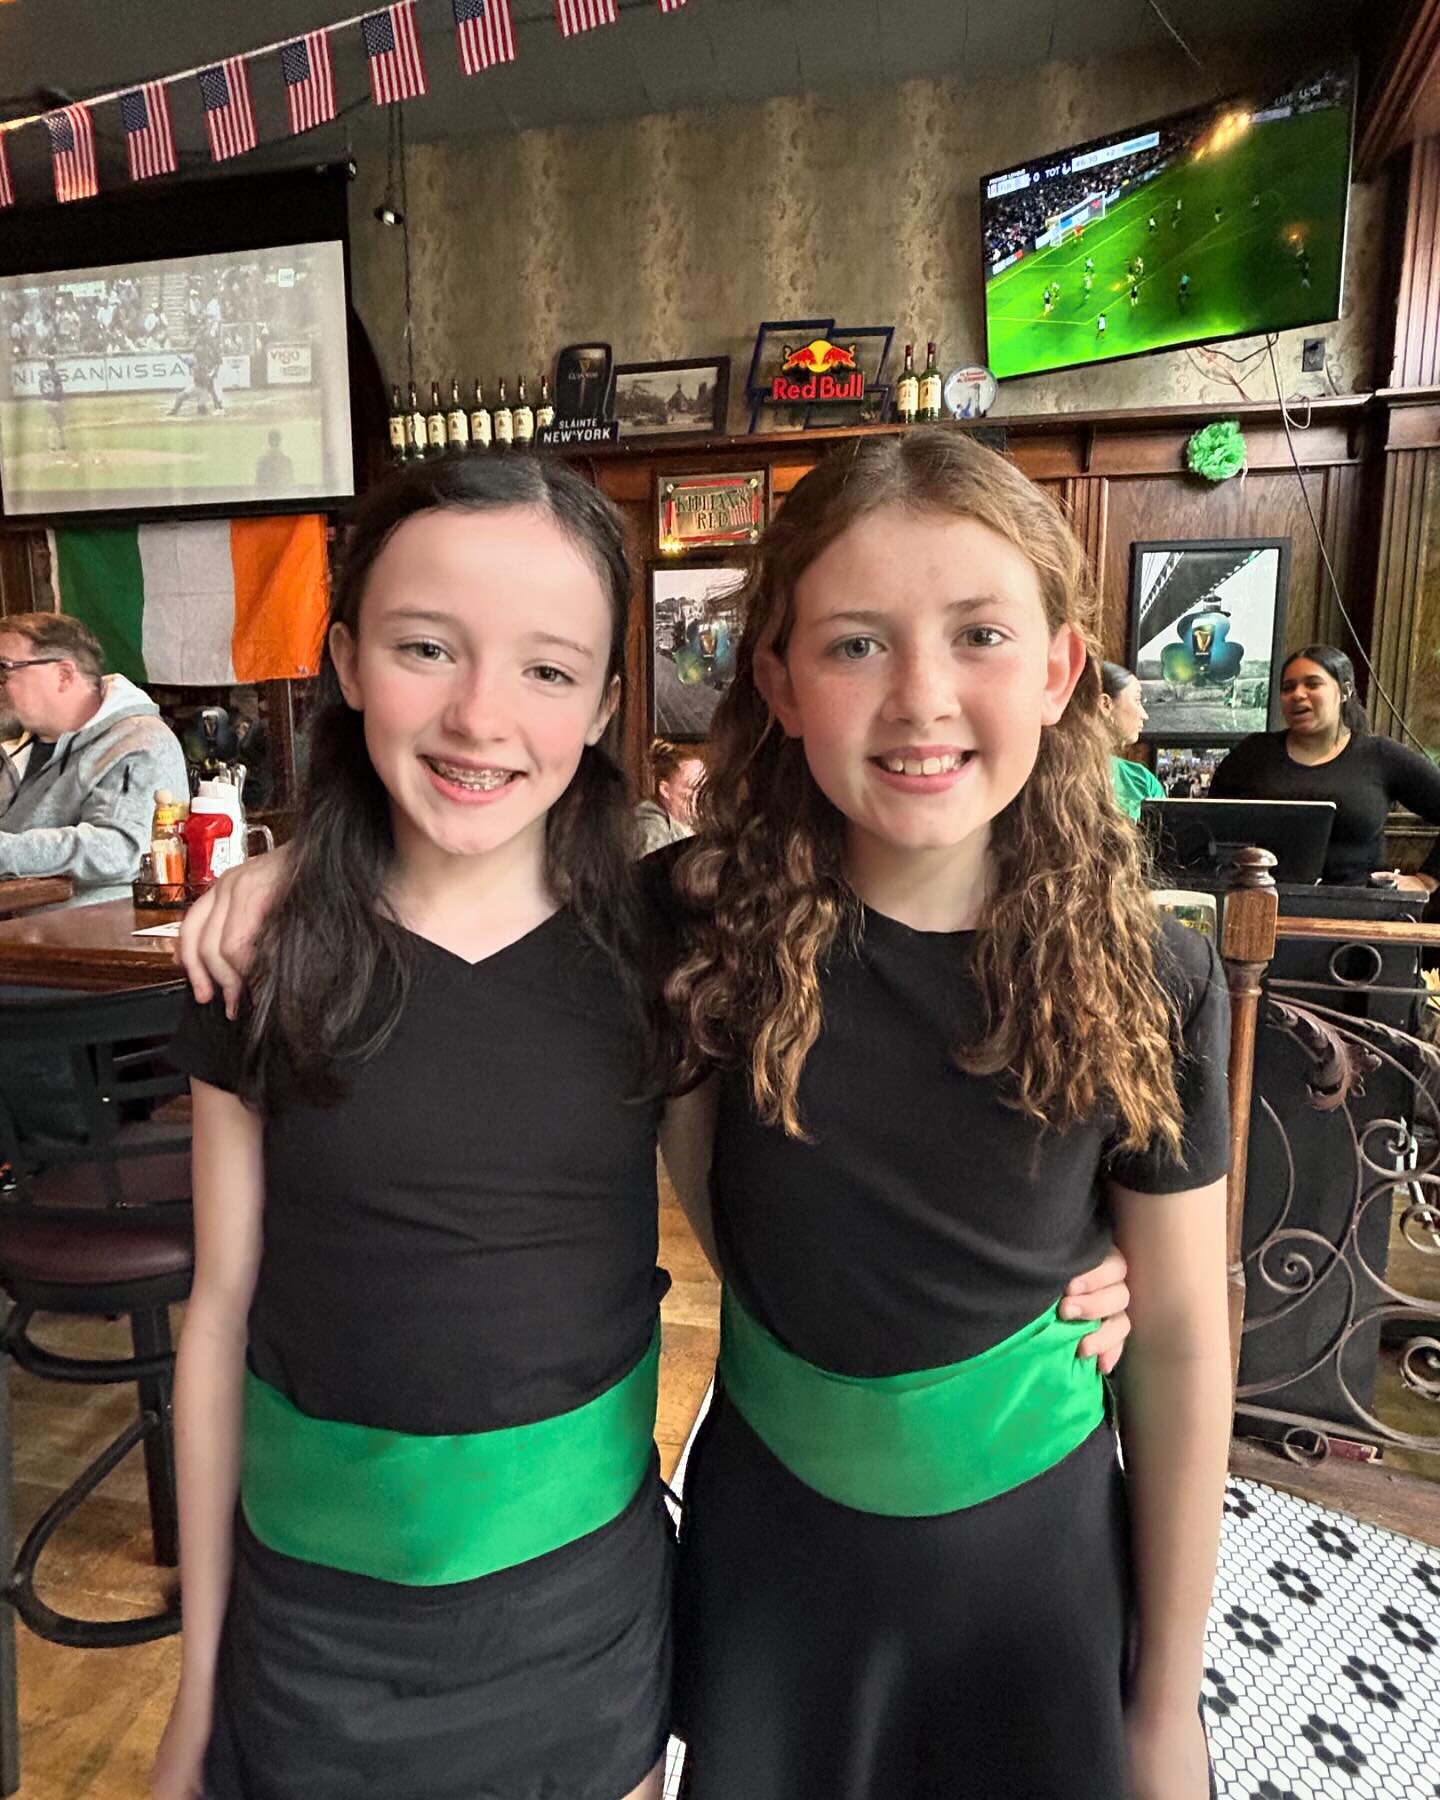 Big thank you to the amazing Irish Dancers Addison McNulty &amp;
Aoife Smith from Scoil Rince Saoirse - Deirdre O&rsquo;&rsquo;Mara Irish Dancing School.. 👏👏👏👏 

🇺🇸☘️🇮🇪